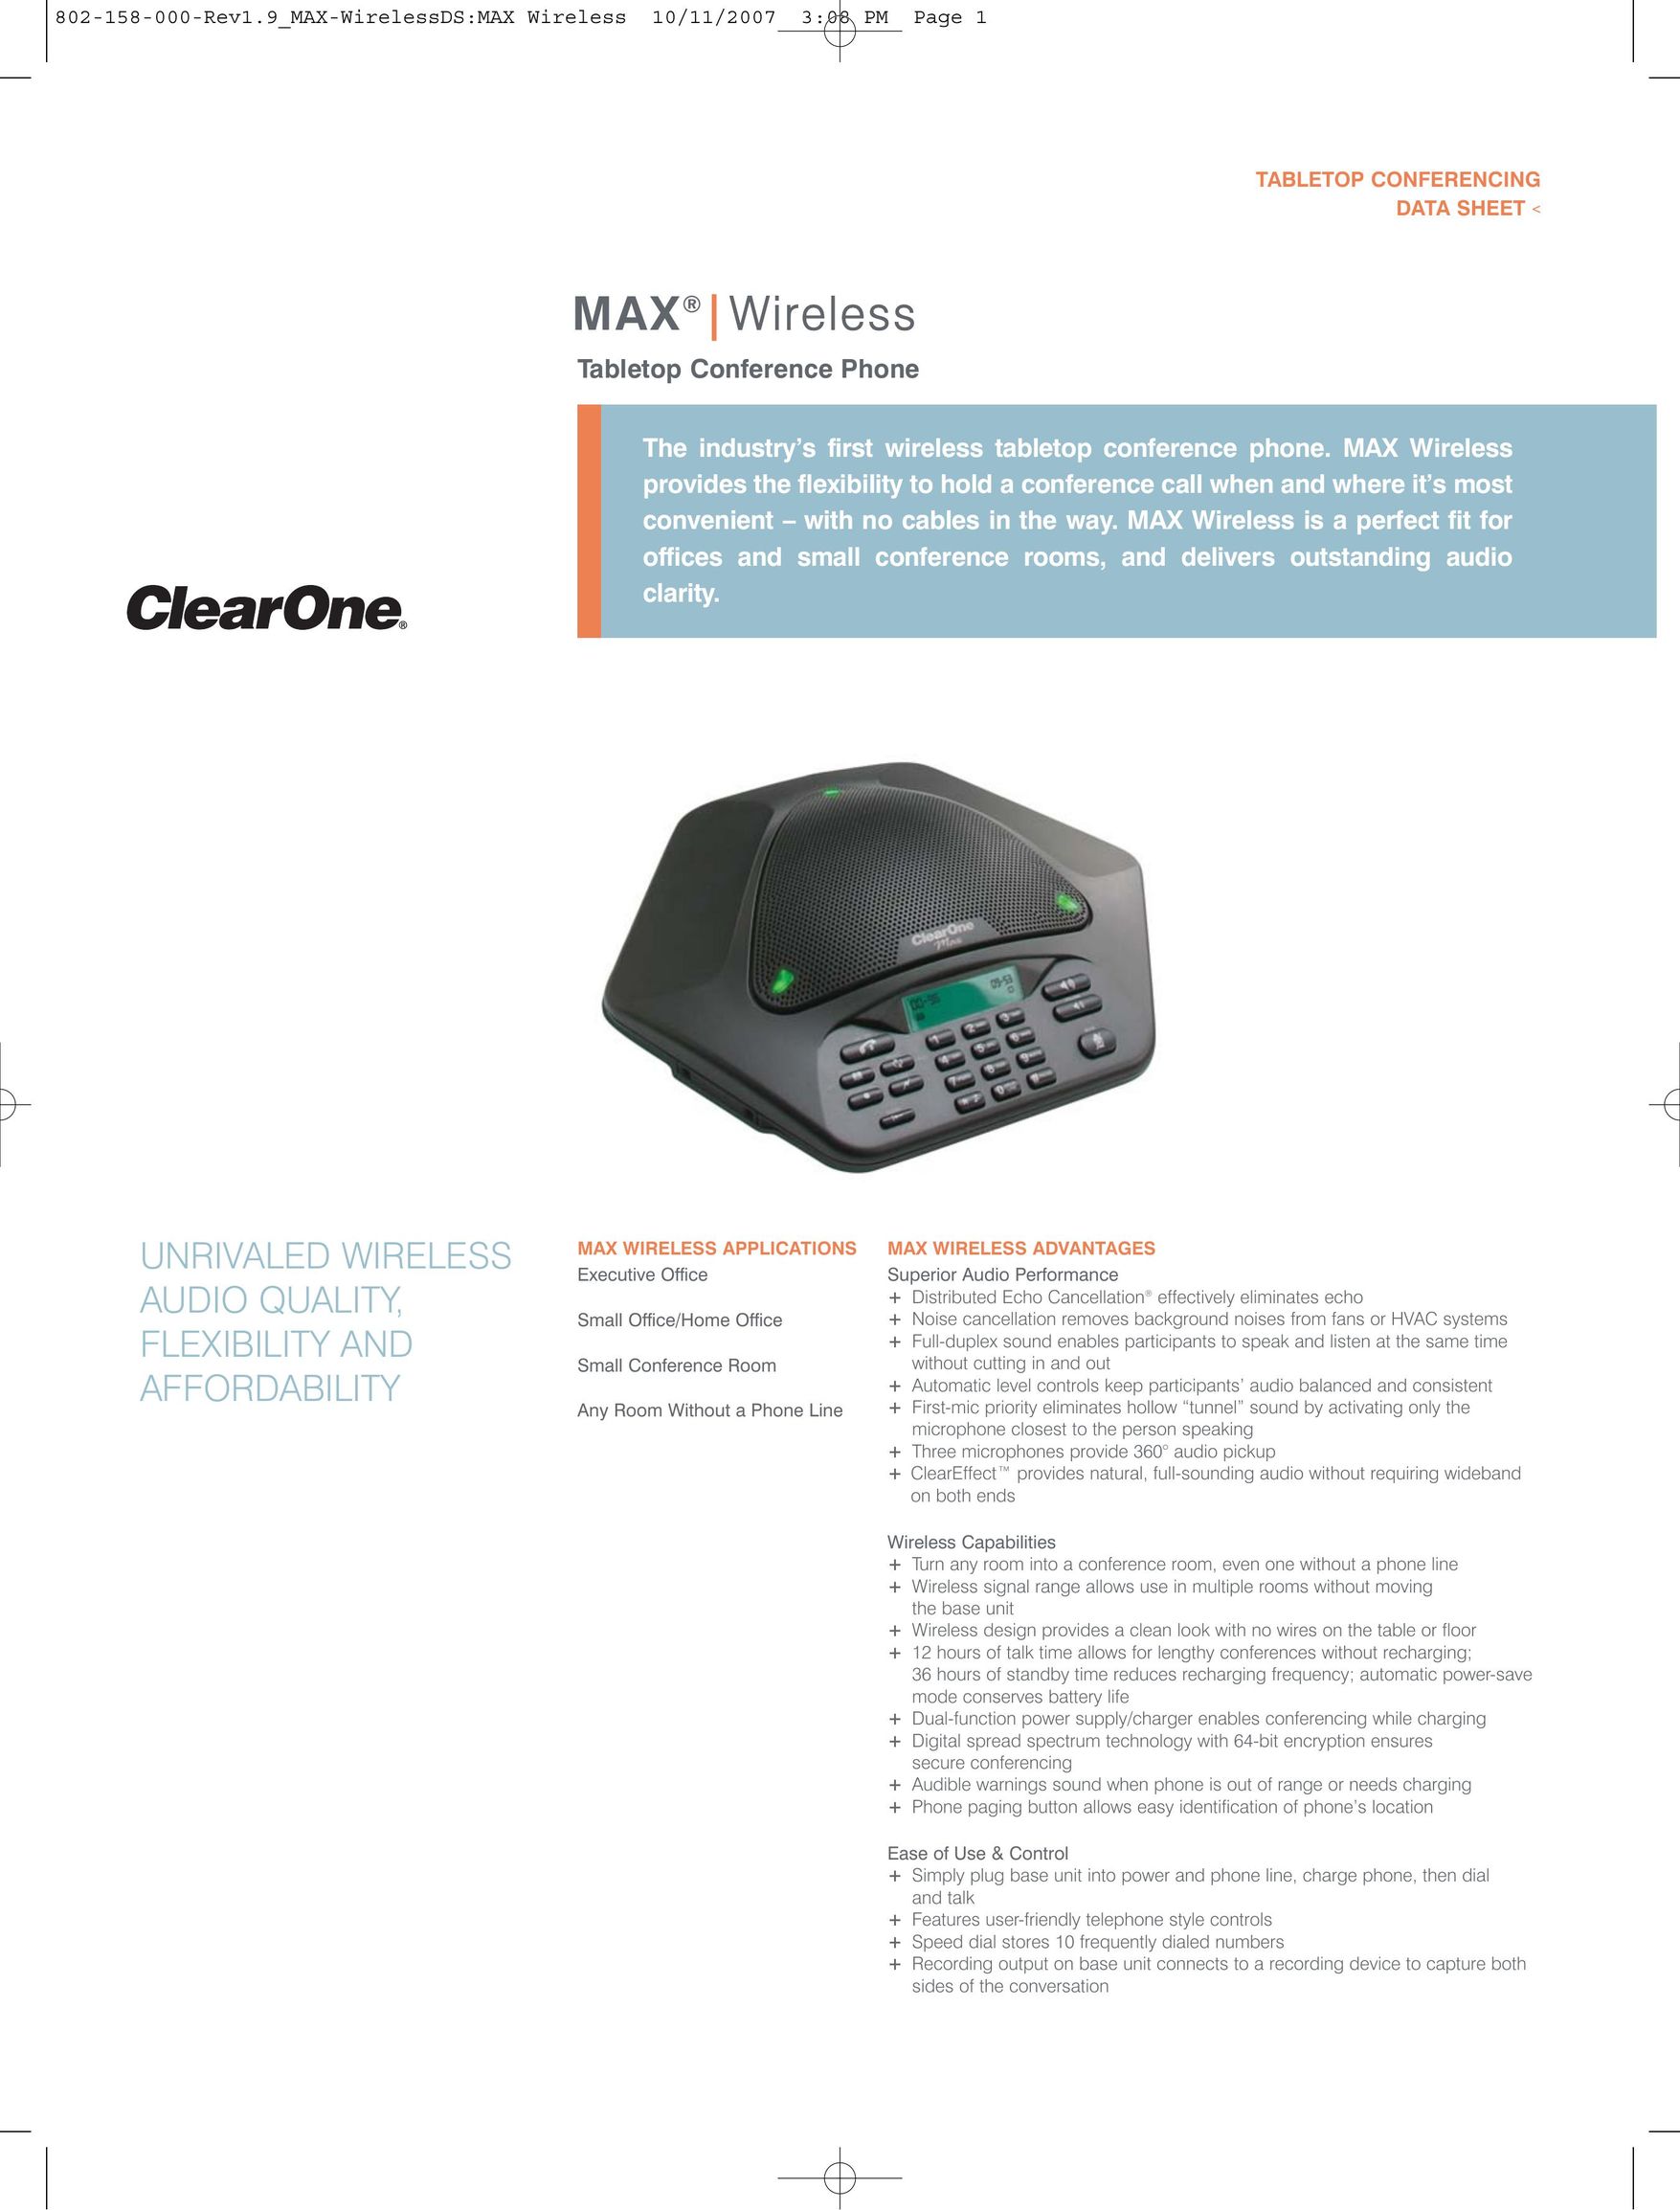 ClearOne comm 910-158-006 Conference Phone User Manual